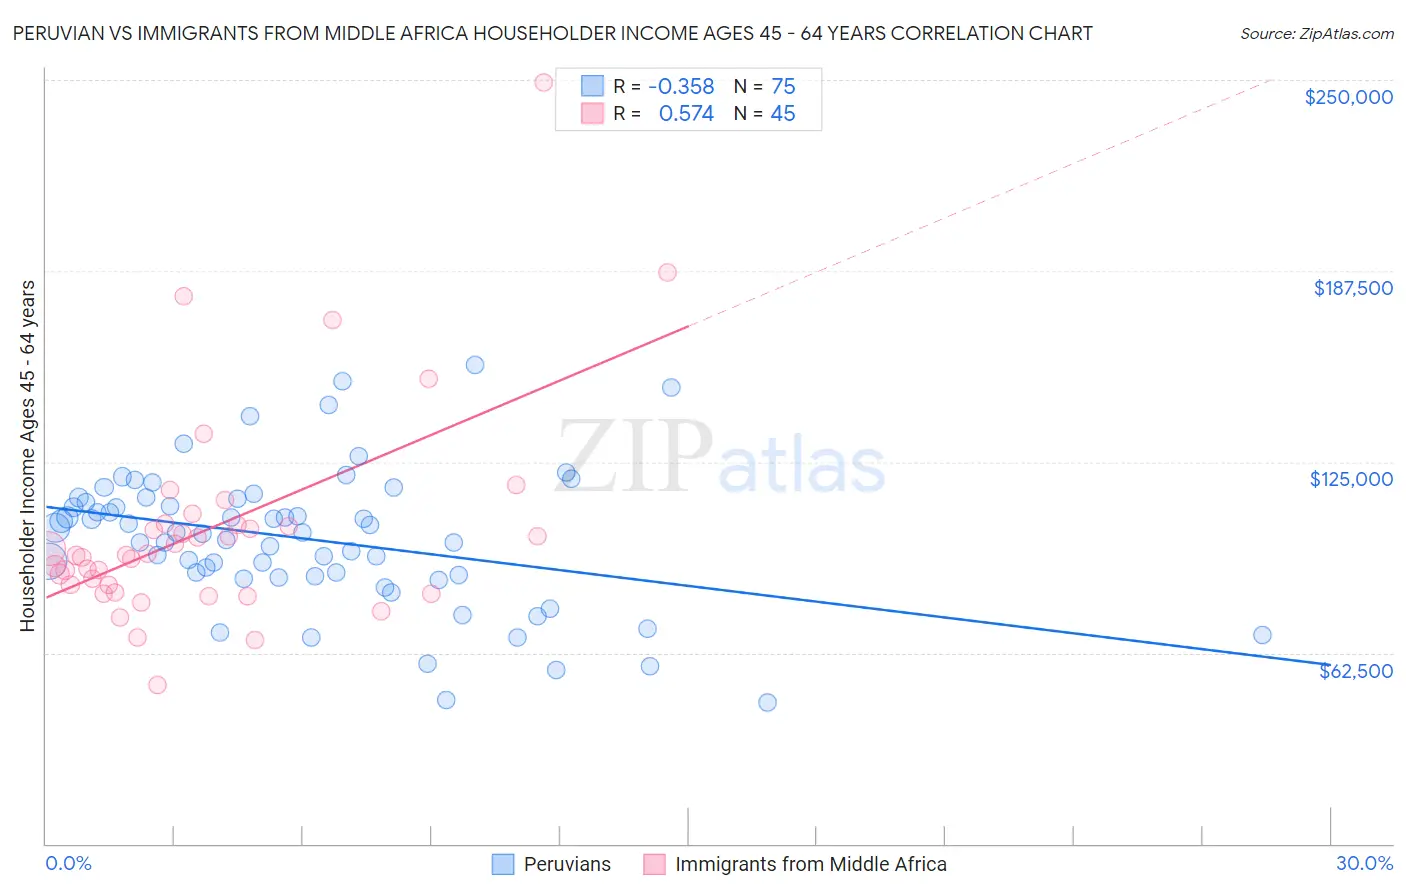 Peruvian vs Immigrants from Middle Africa Householder Income Ages 45 - 64 years